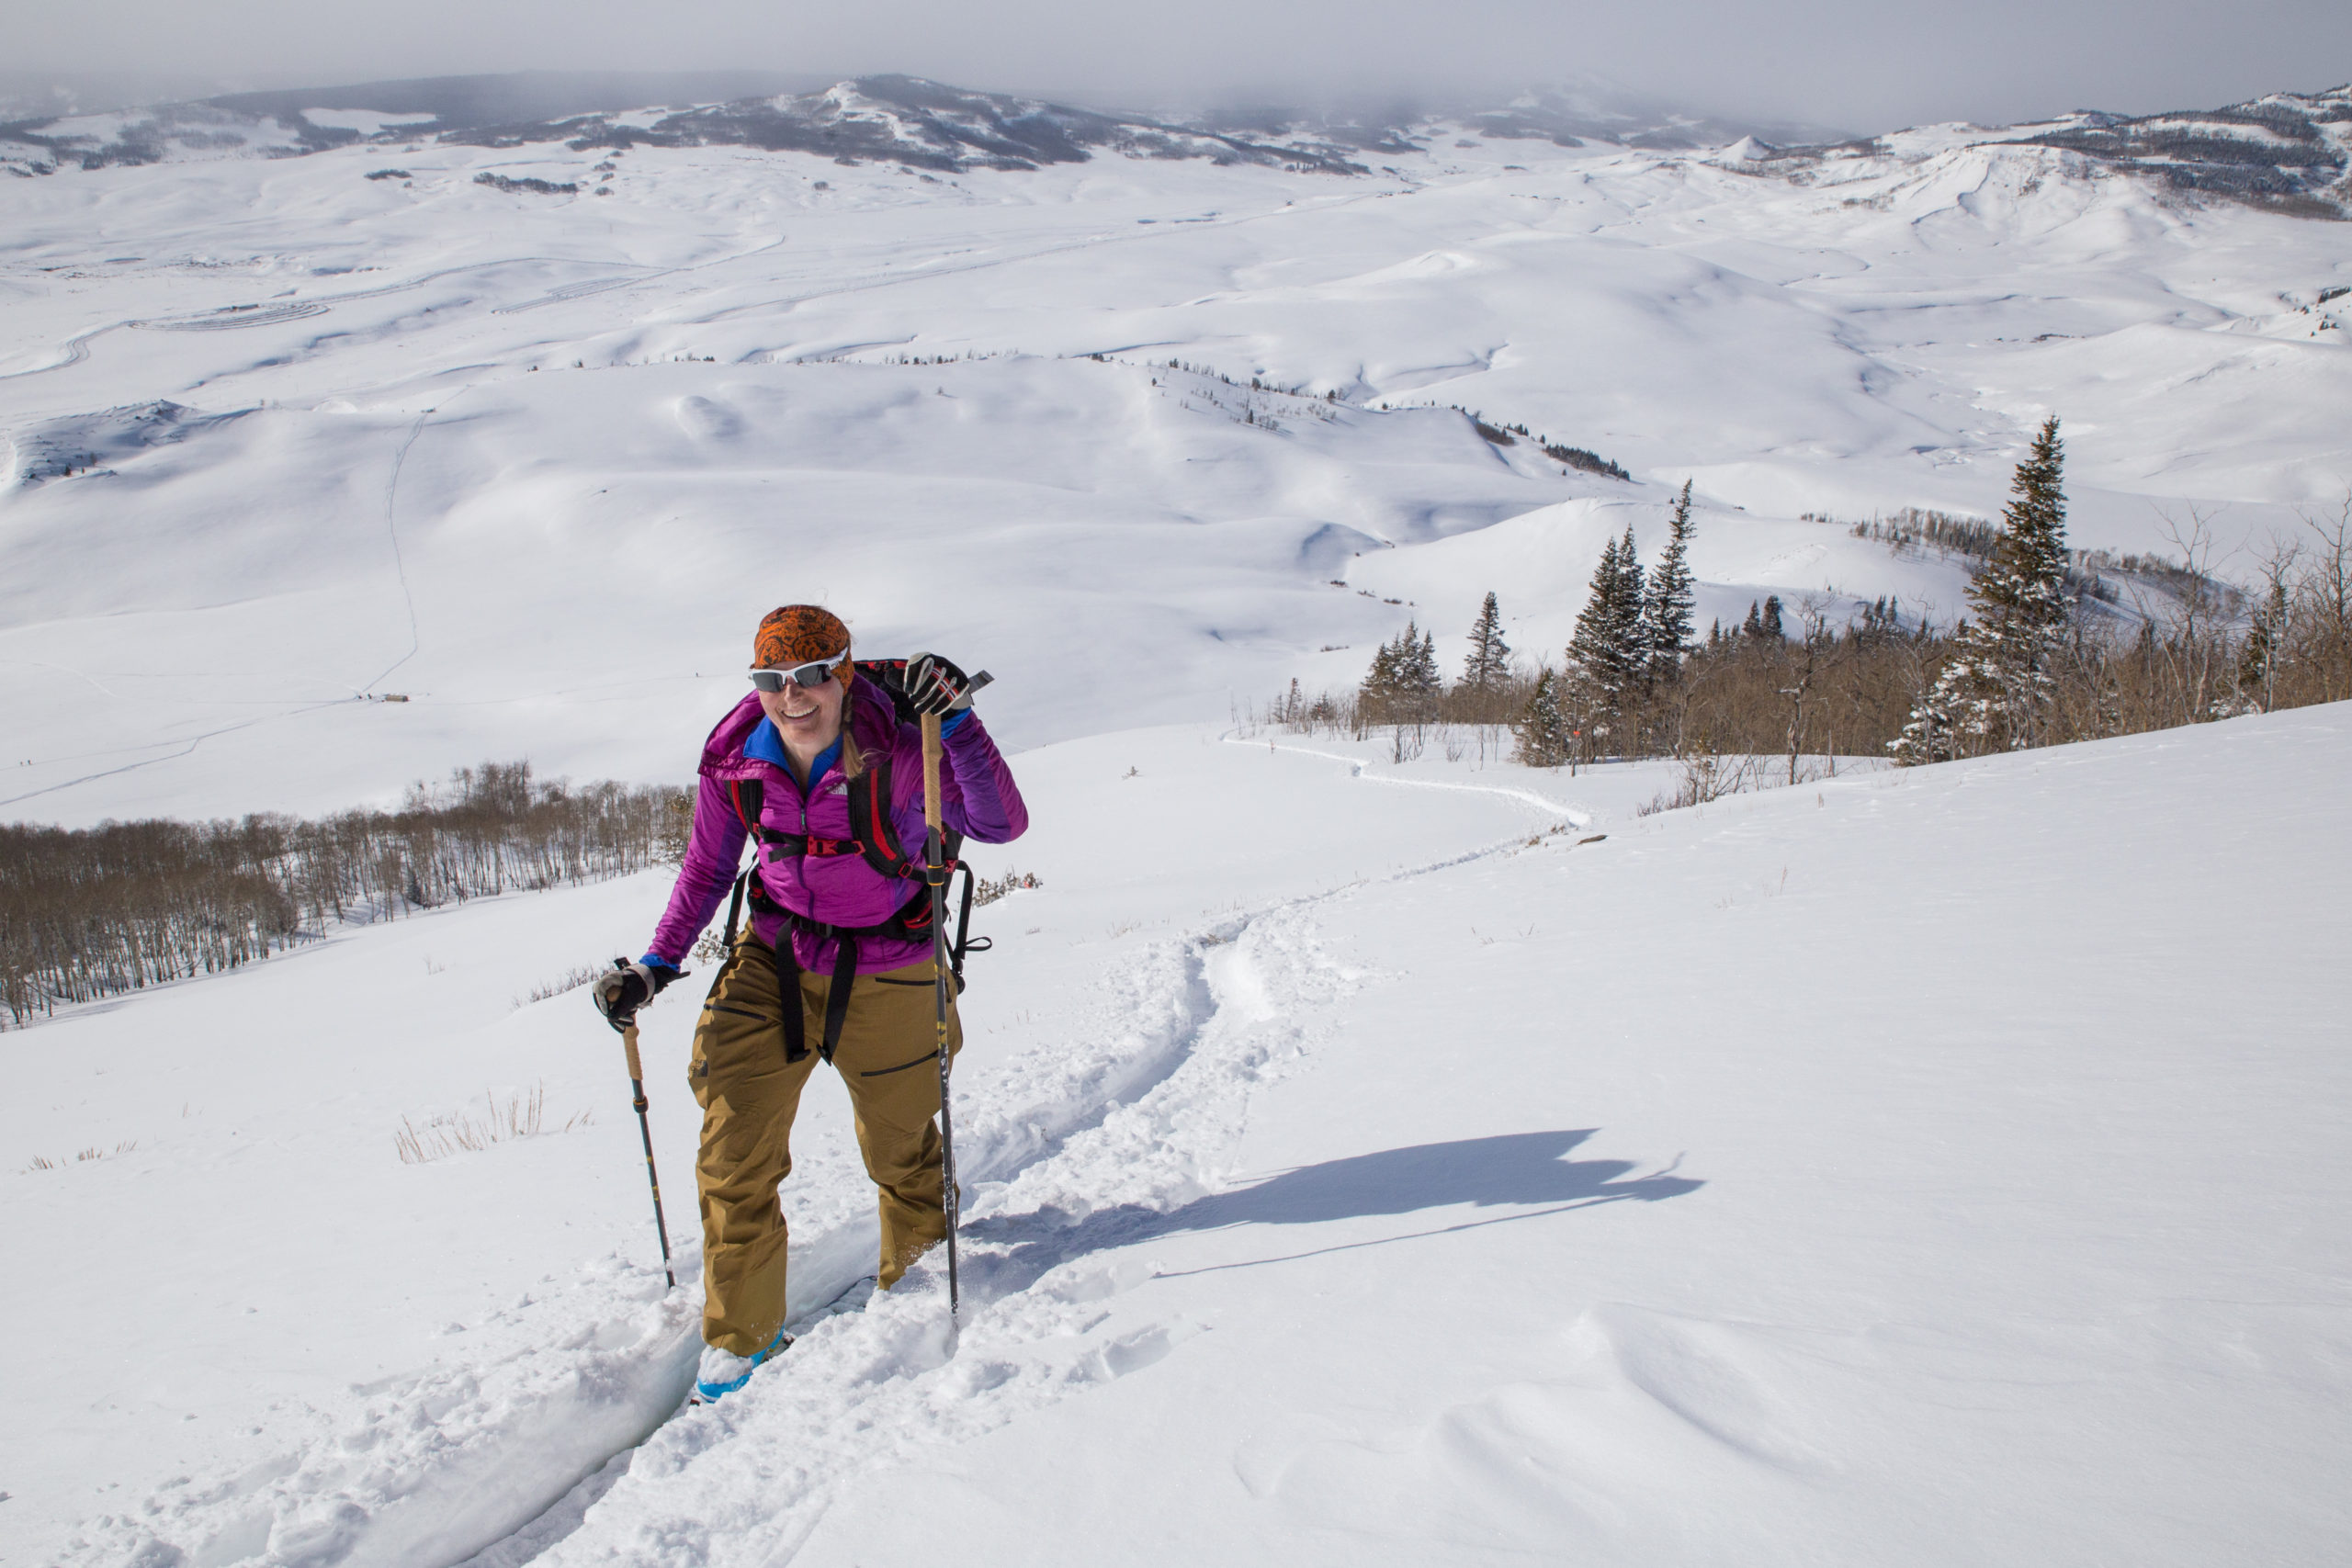 A backcountry skier skins up a track. Snow-covered plains sprawl out behind her.